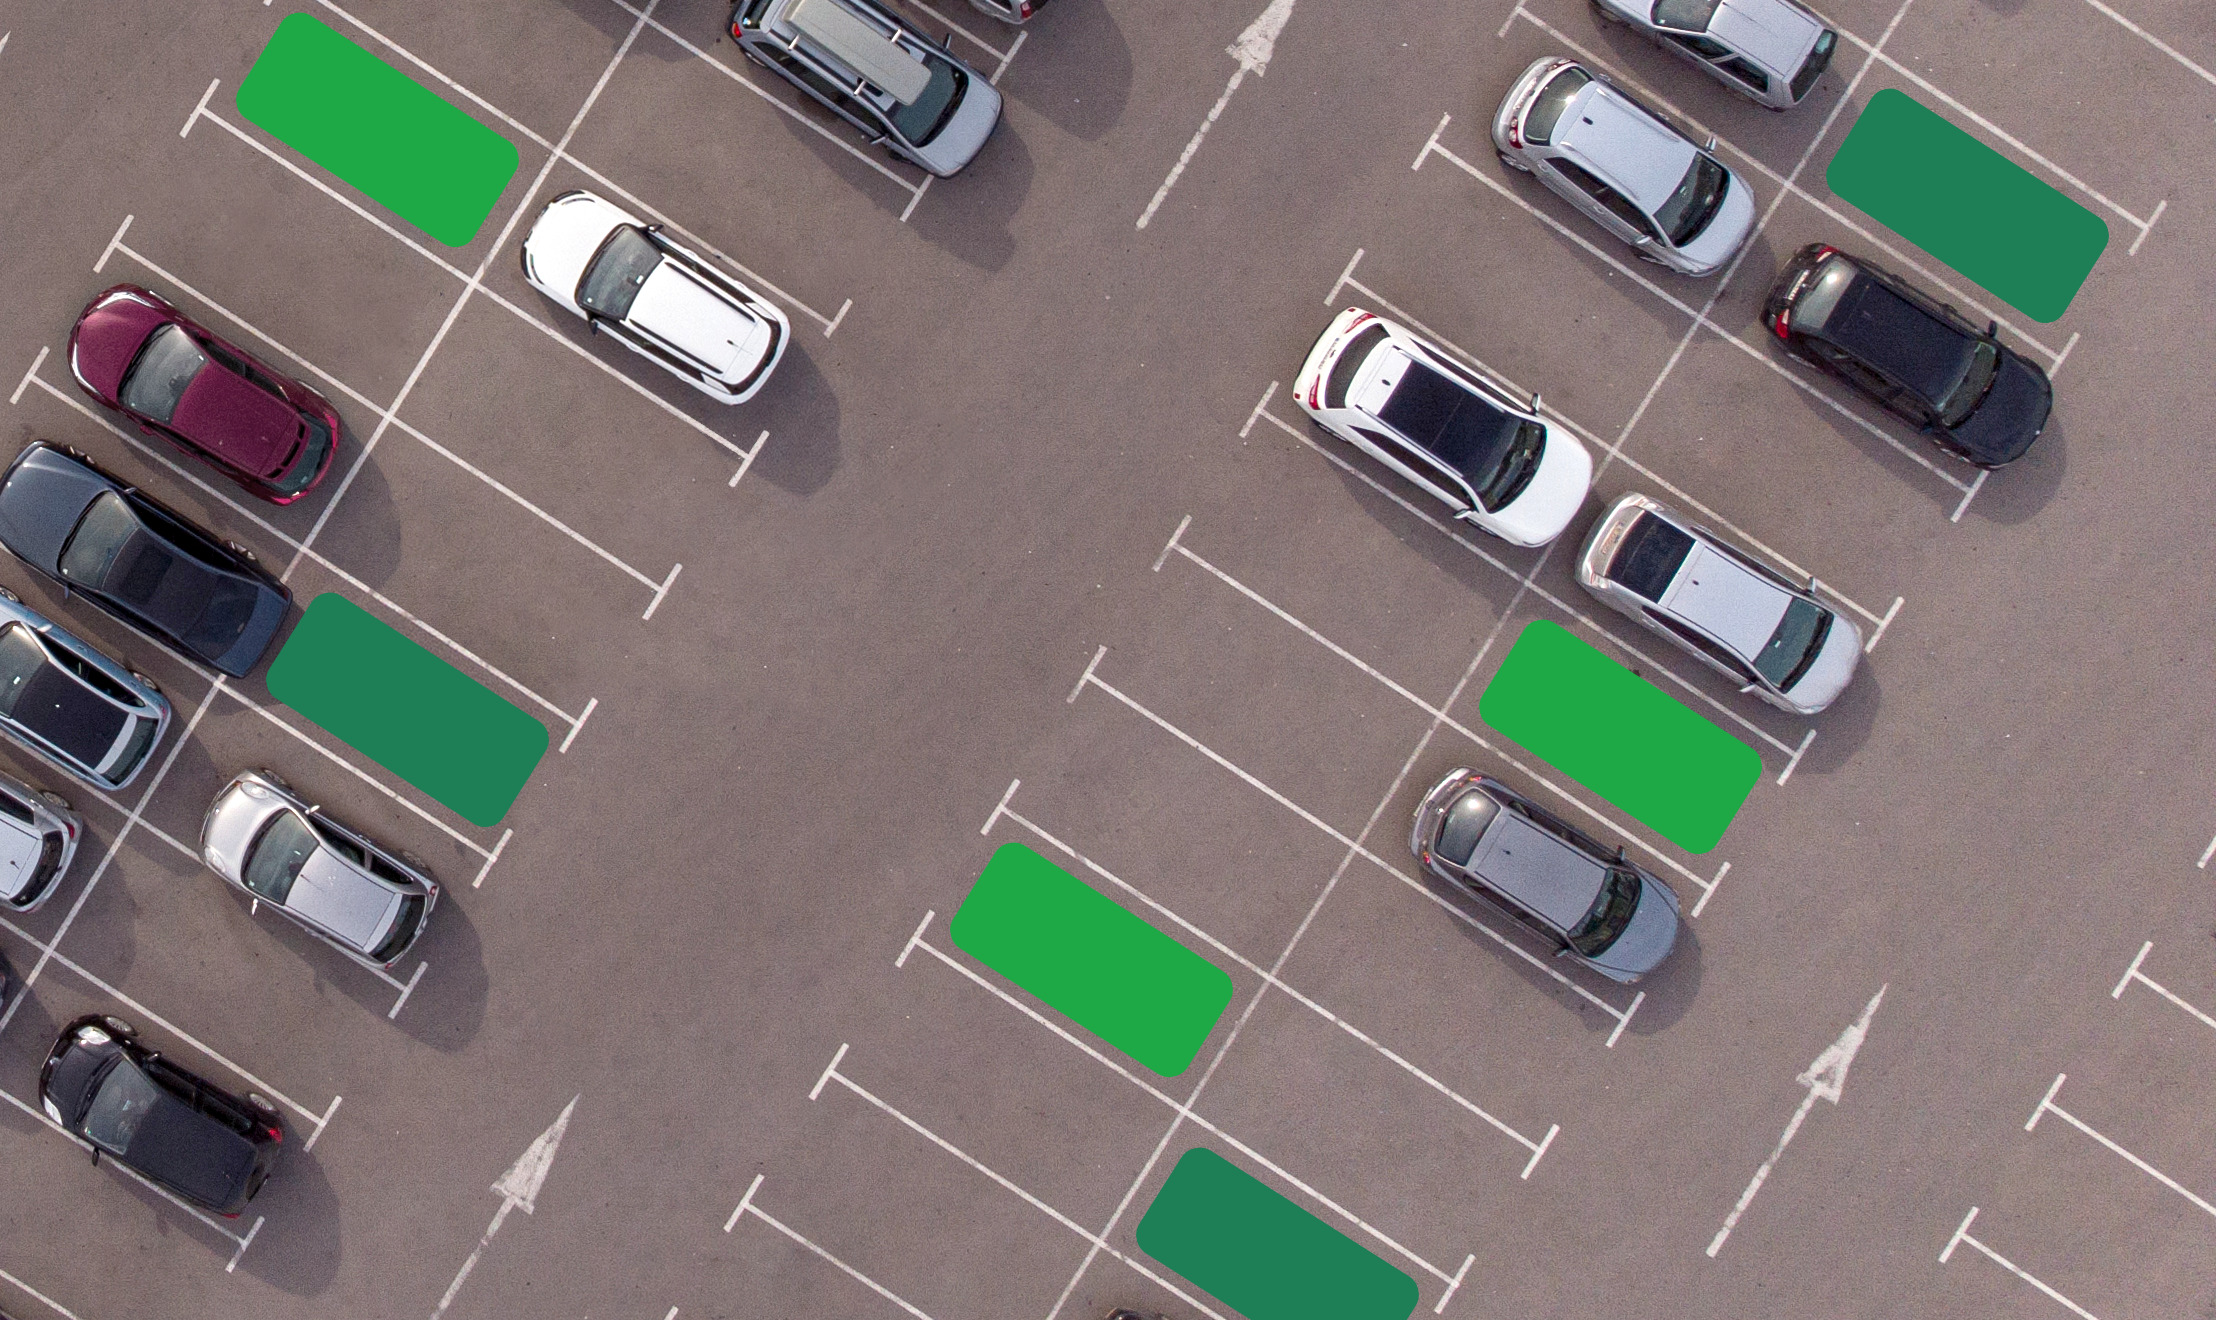 Parking Operation Reporting and Analytics Solution